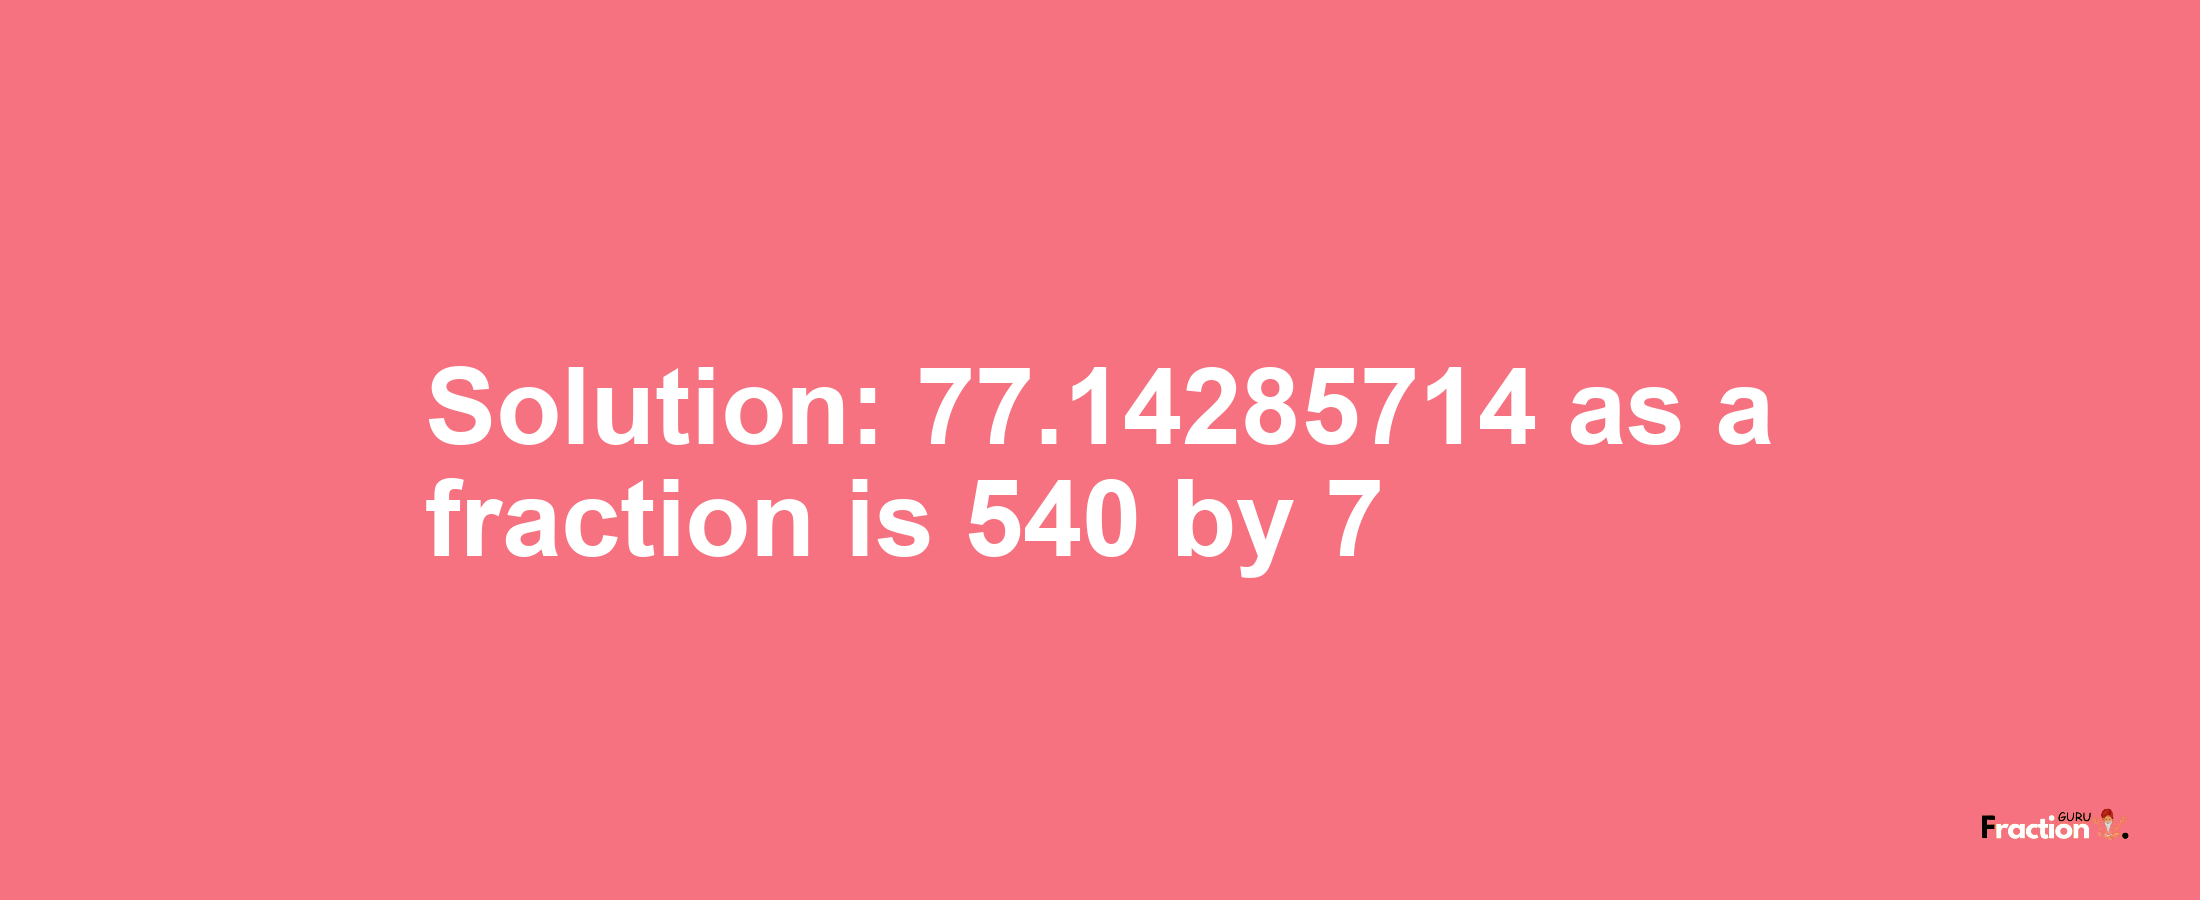 Solution:77.14285714 as a fraction is 540/7